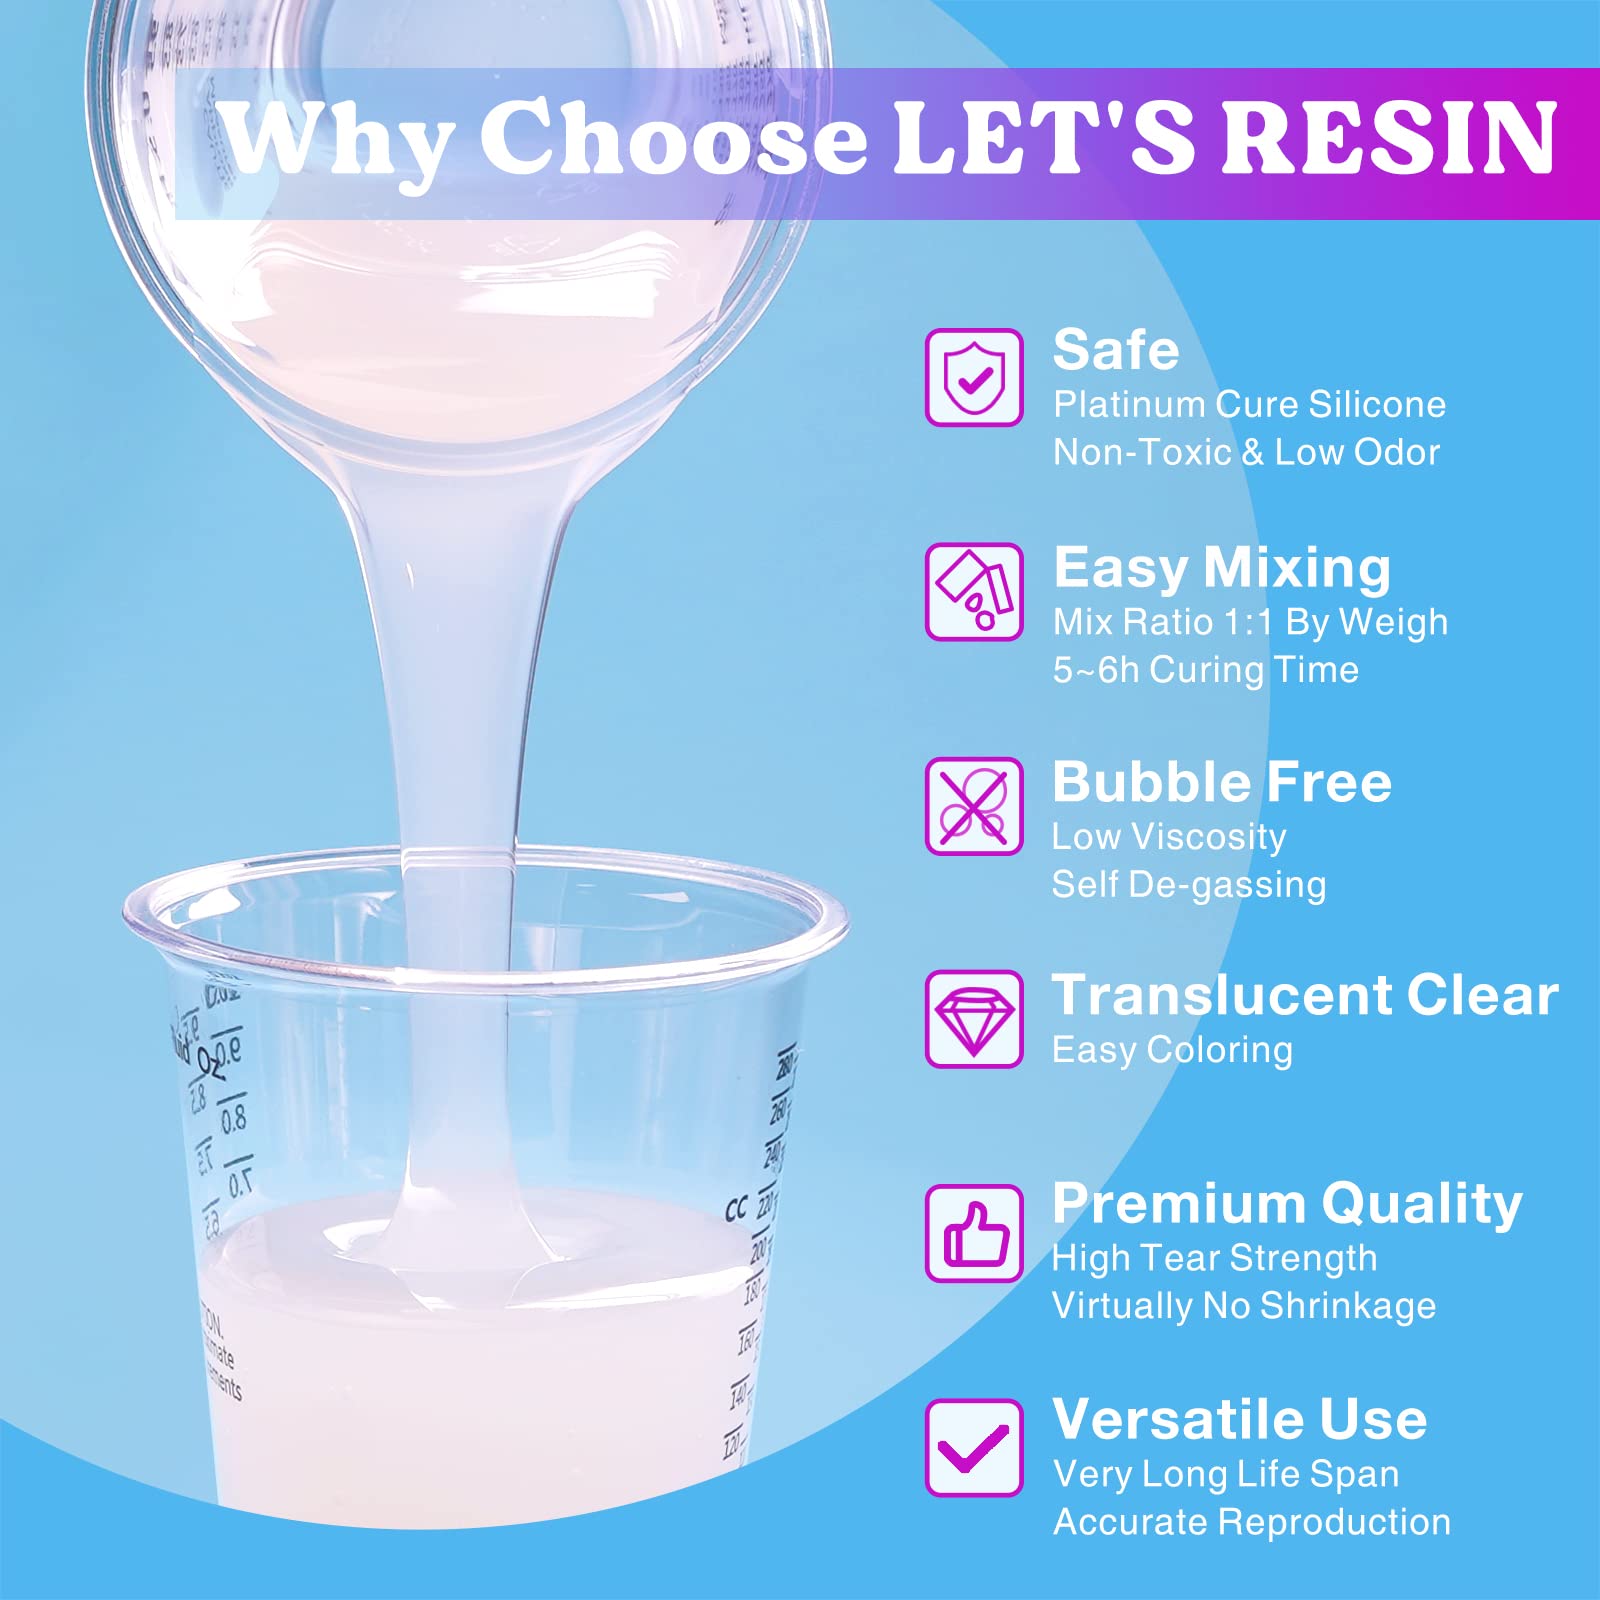 Your go-to source for bargains: You can count on Lets Resin Silicone Mold  Making Kit Two Part Liquid 2 x 300g (600mL Total) 963 for the best deals